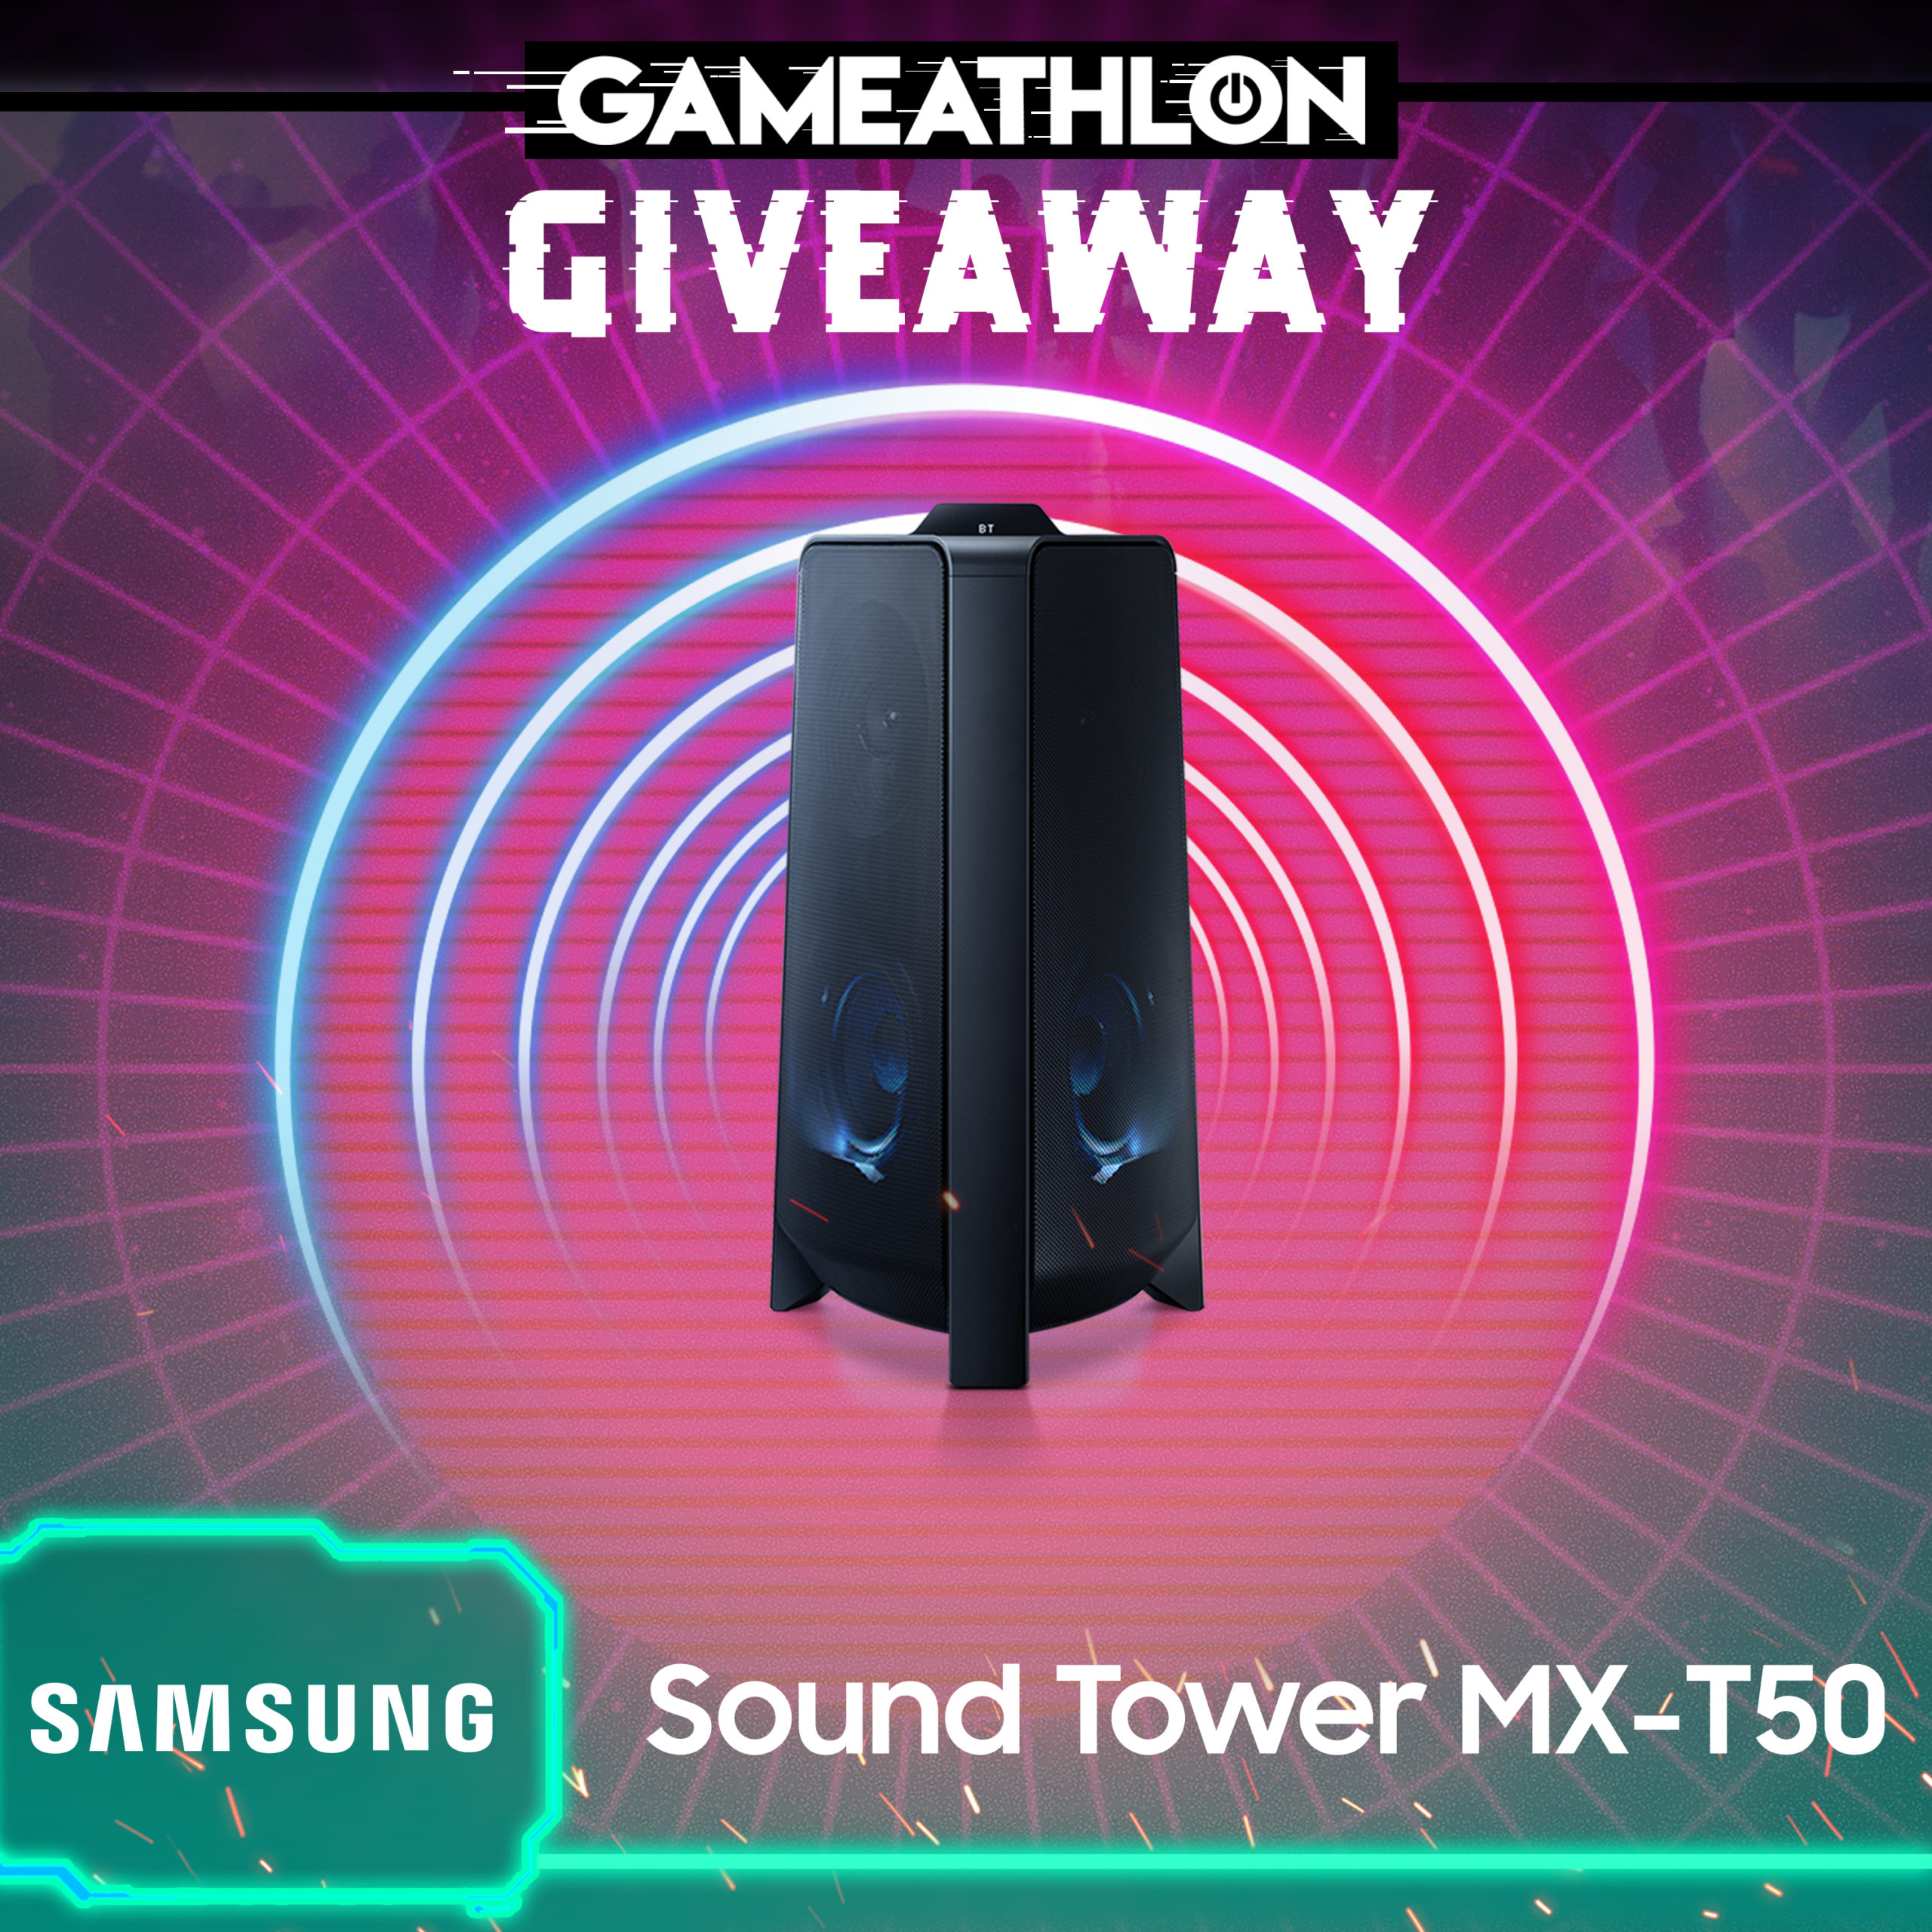 Samsung Sound Tower Giveaway